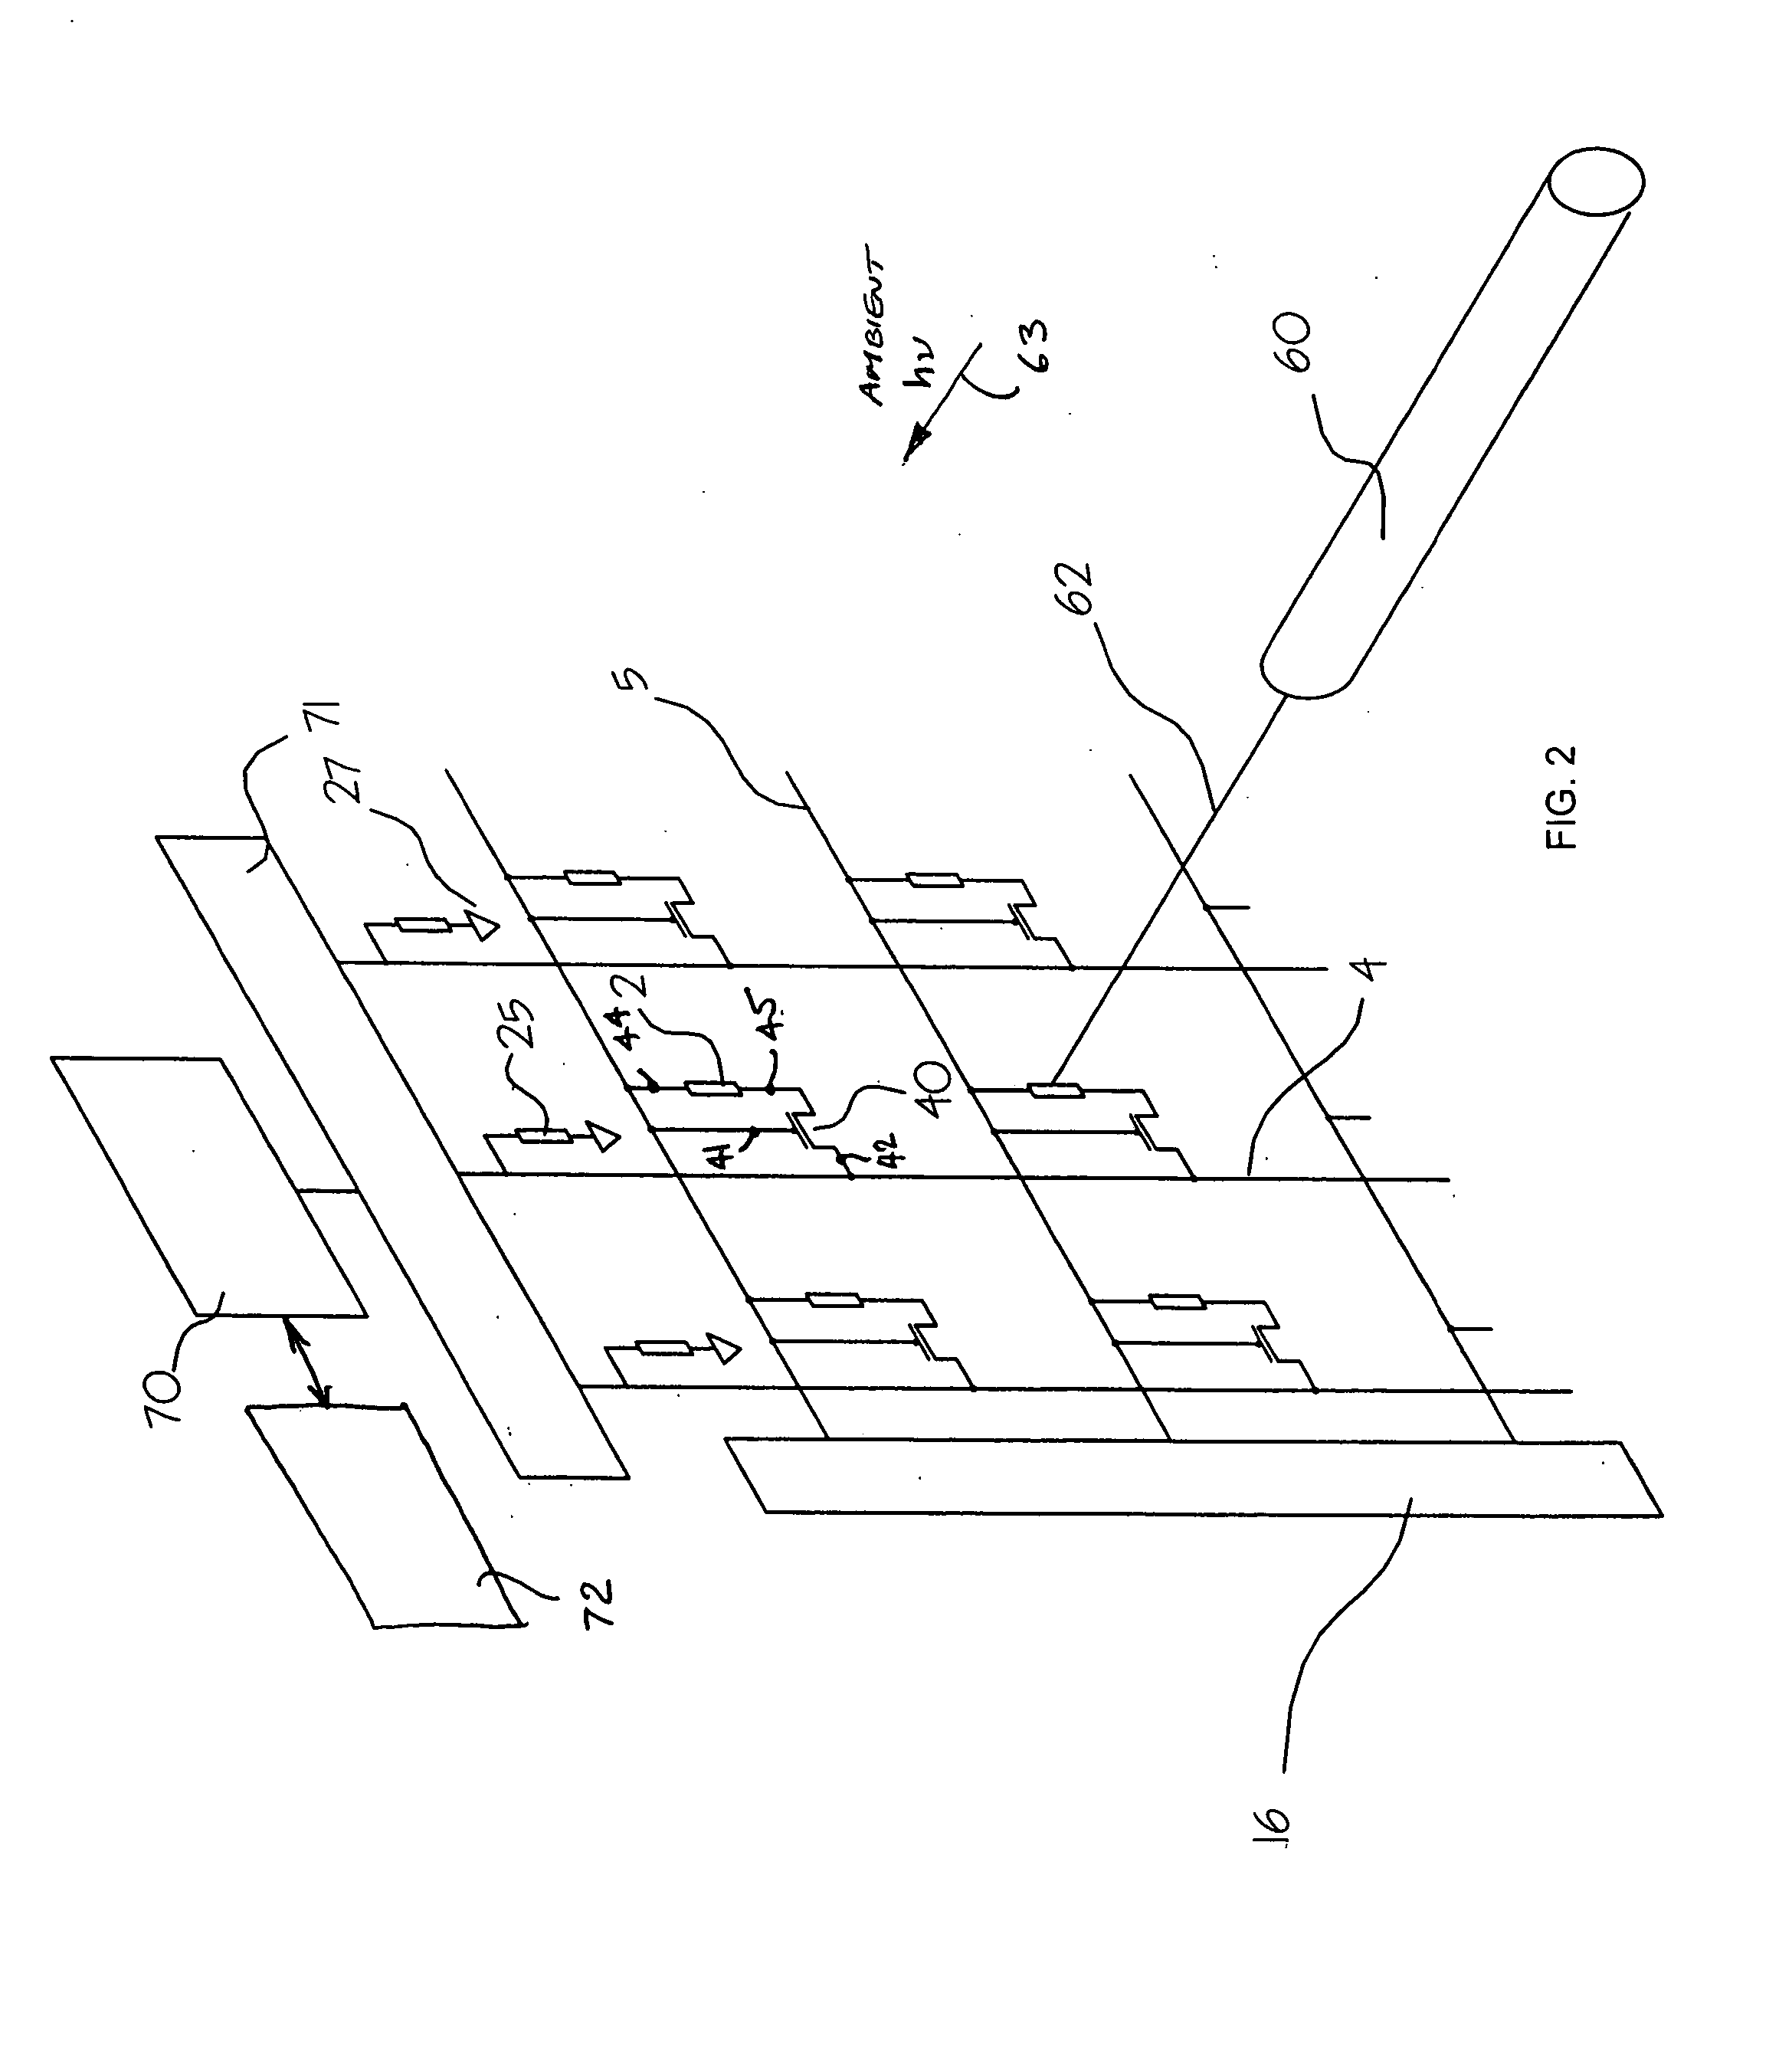 Penlight and touch screen data input system and method for flat panel displays